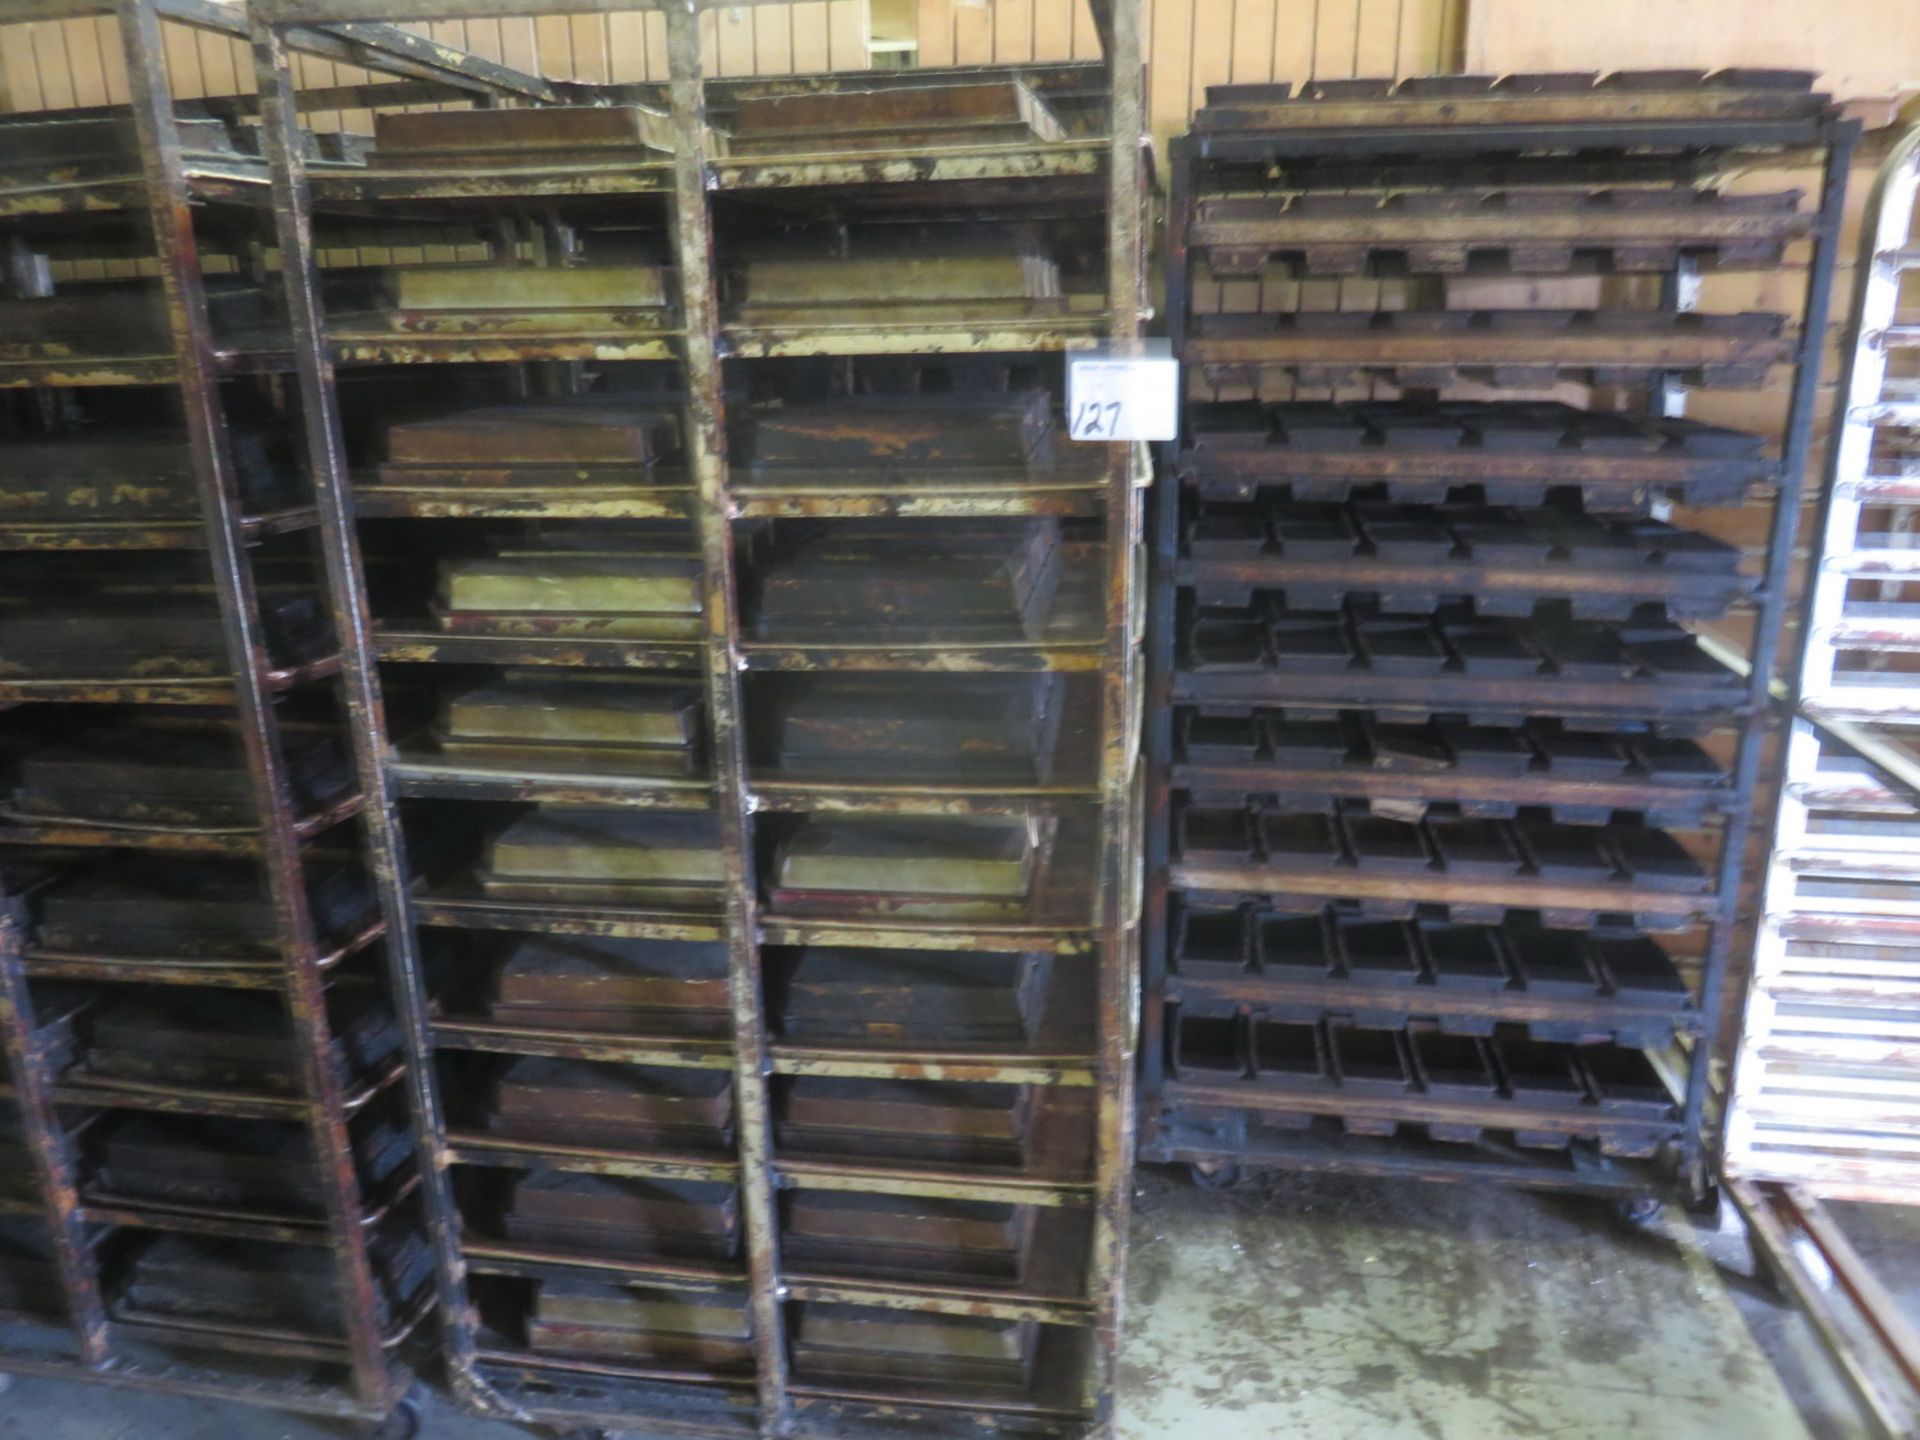 UNITS - ALUMINUM APPROX 35" X 26" X 71"H BAKING PAN TROLLEY RACKS W/ ASSORTED BAKING TRAYS - Image 2 of 2